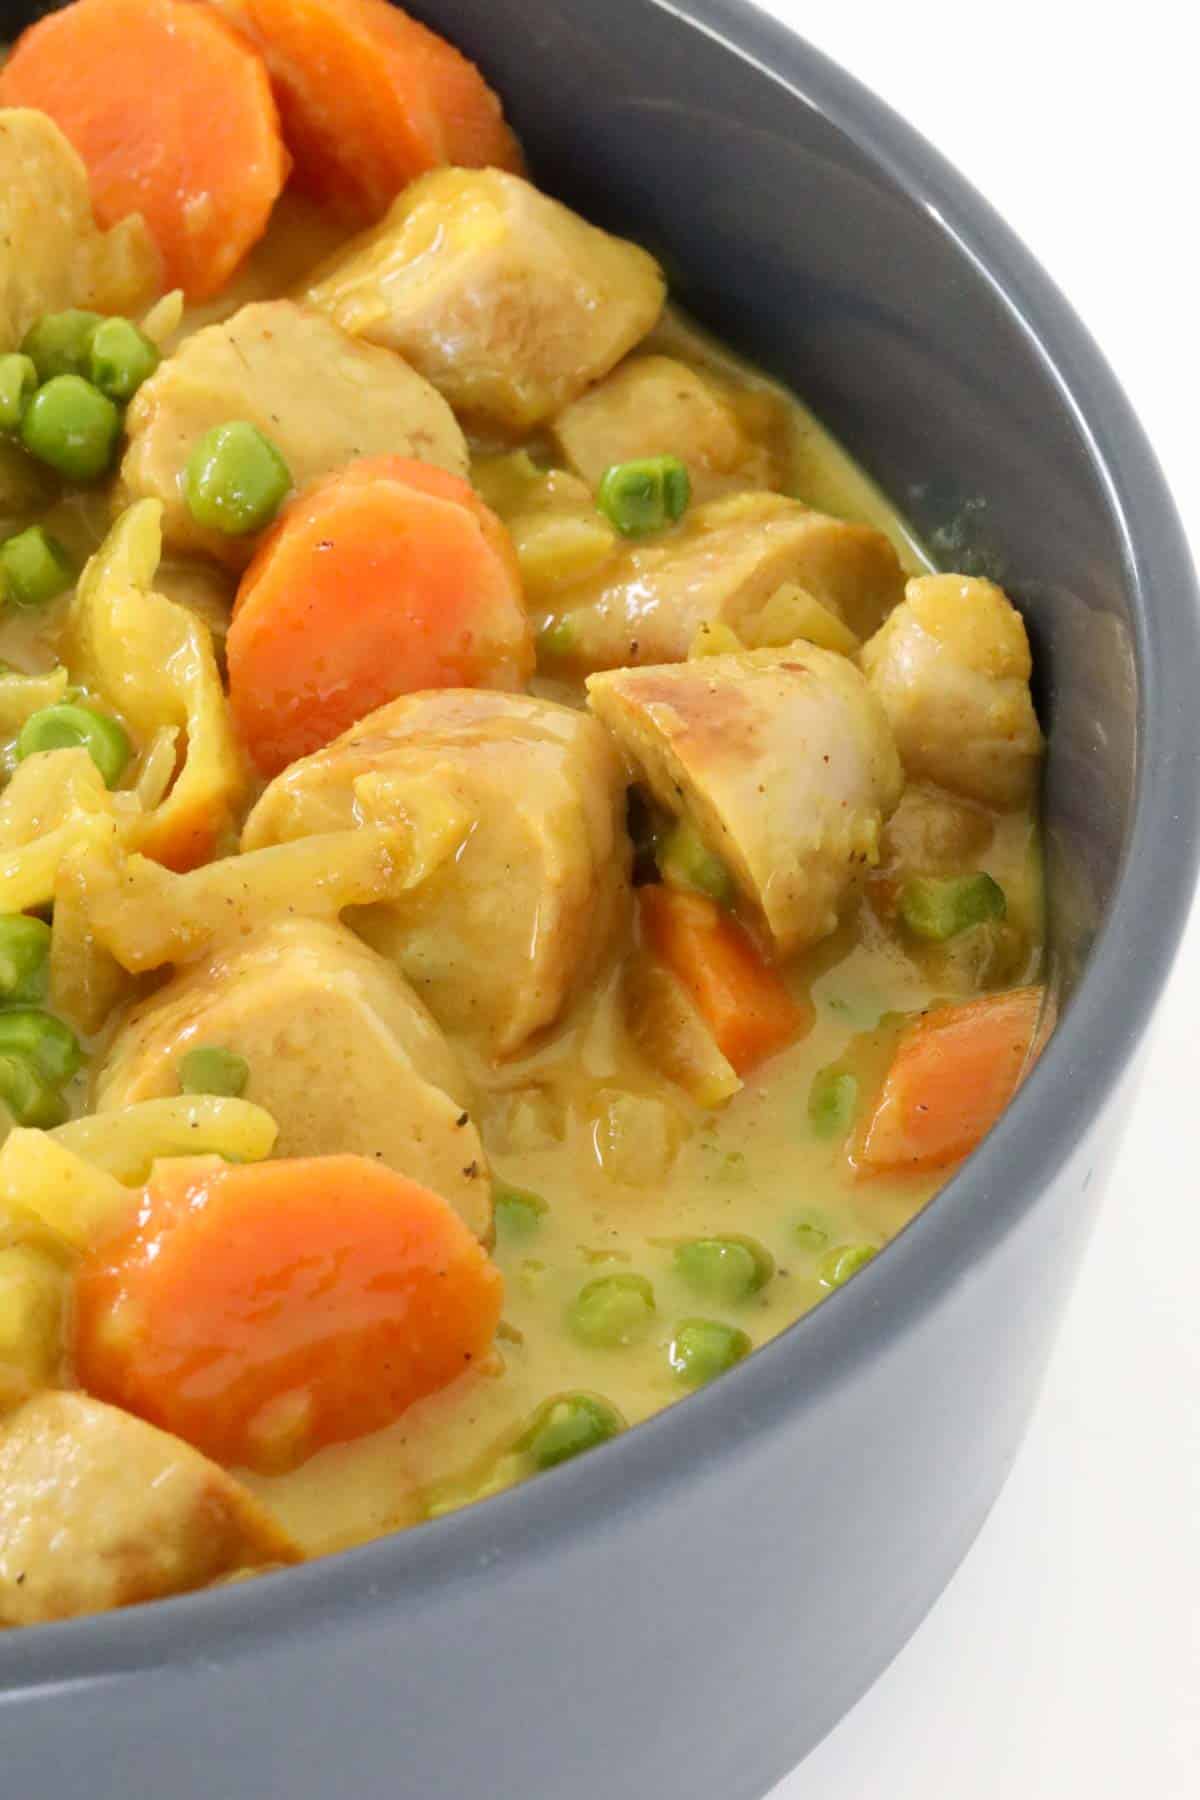 Chunks of sausage in a curried gravy with peas and sliced carrot.